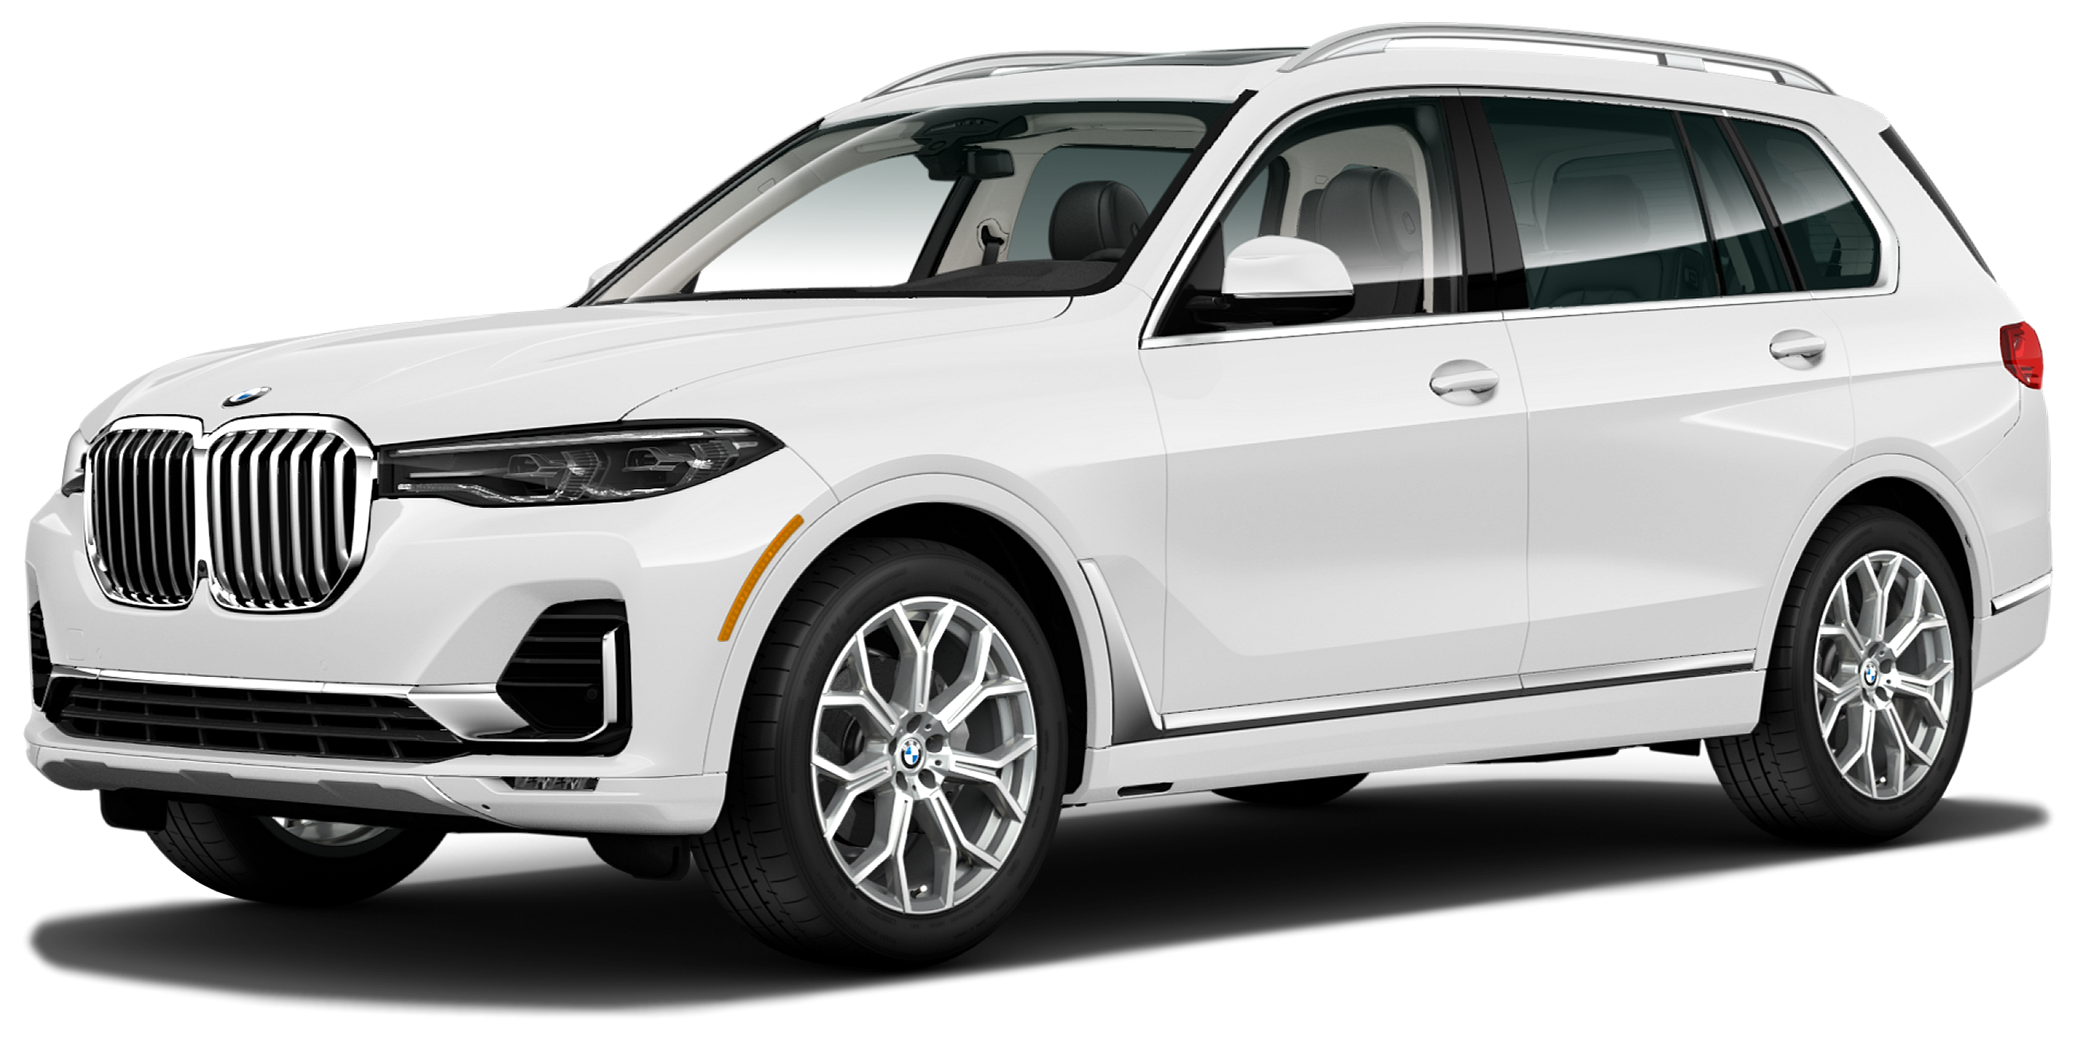 2022 BMW X7 Incentives, Specials & Offers in Winter Park FL